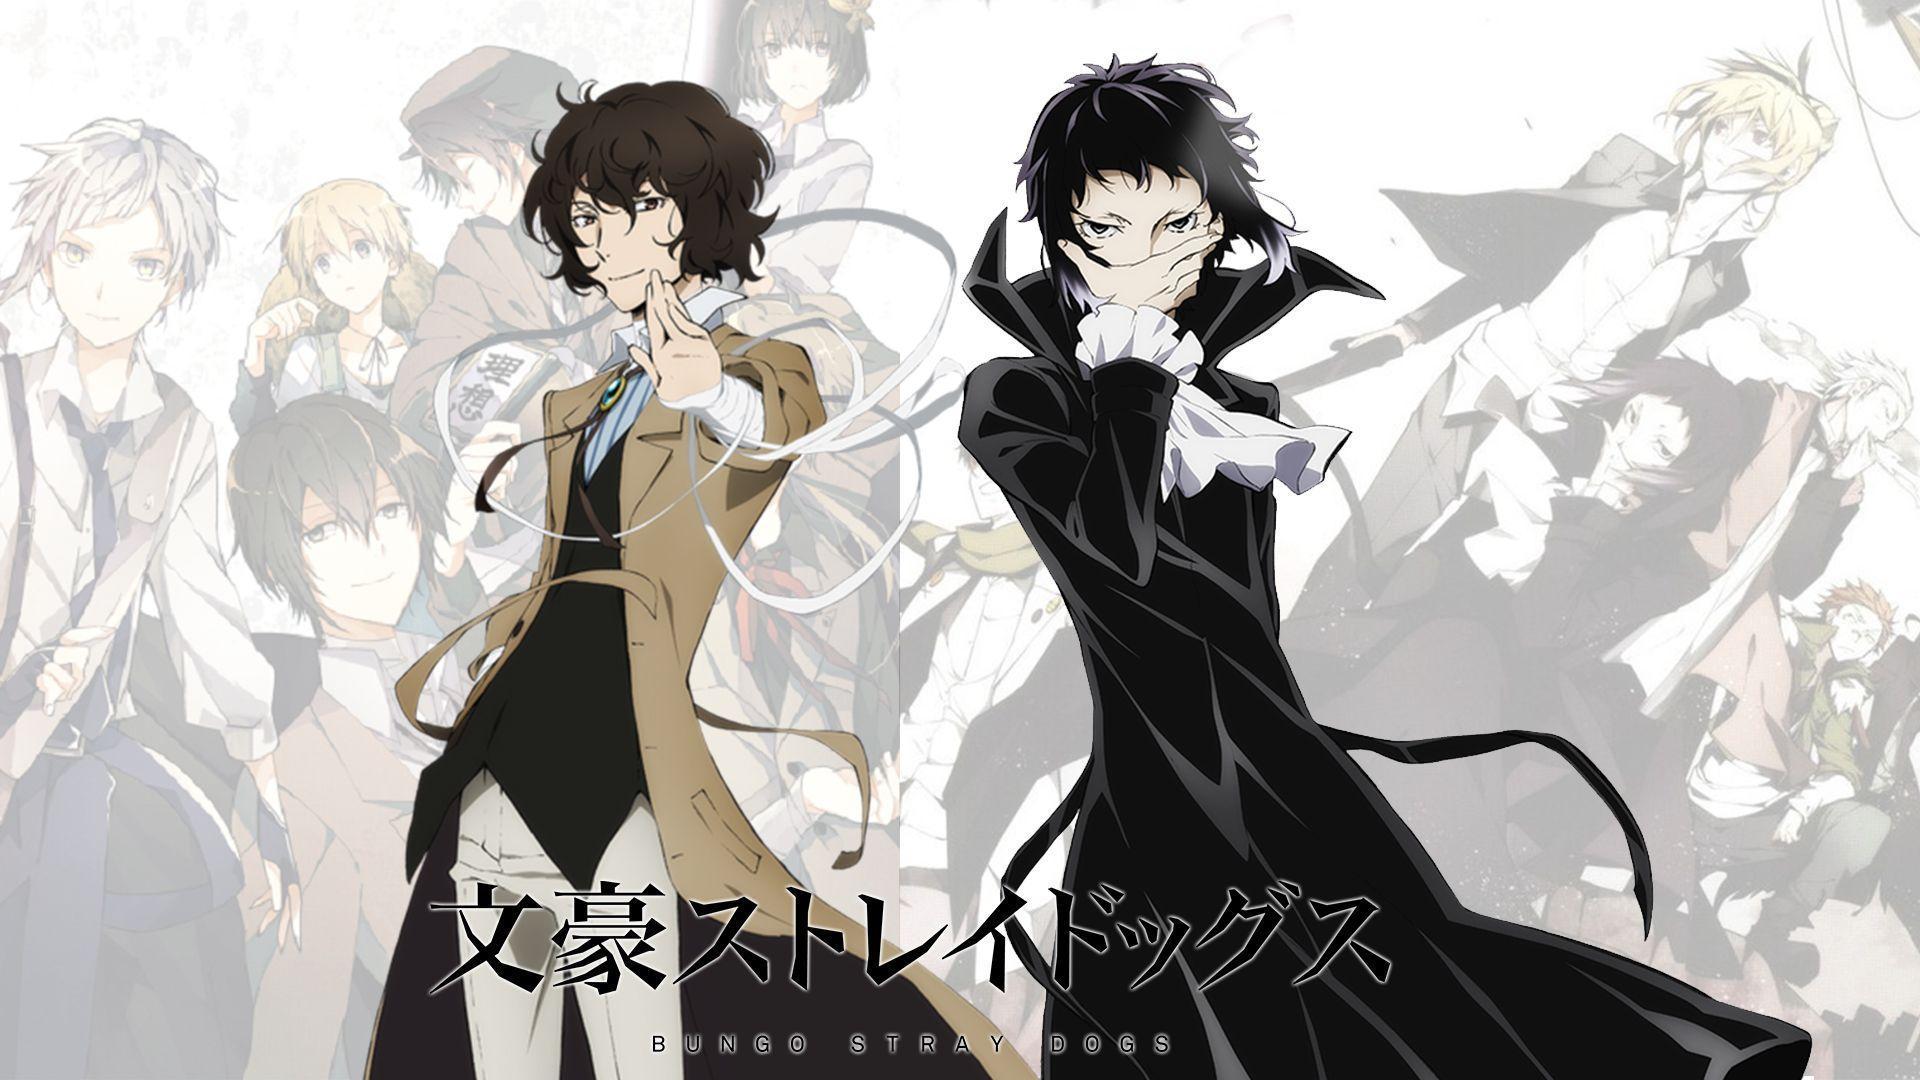 Bungou Stray Dogs Anime HD Wallpapers - Wallpaper Cave